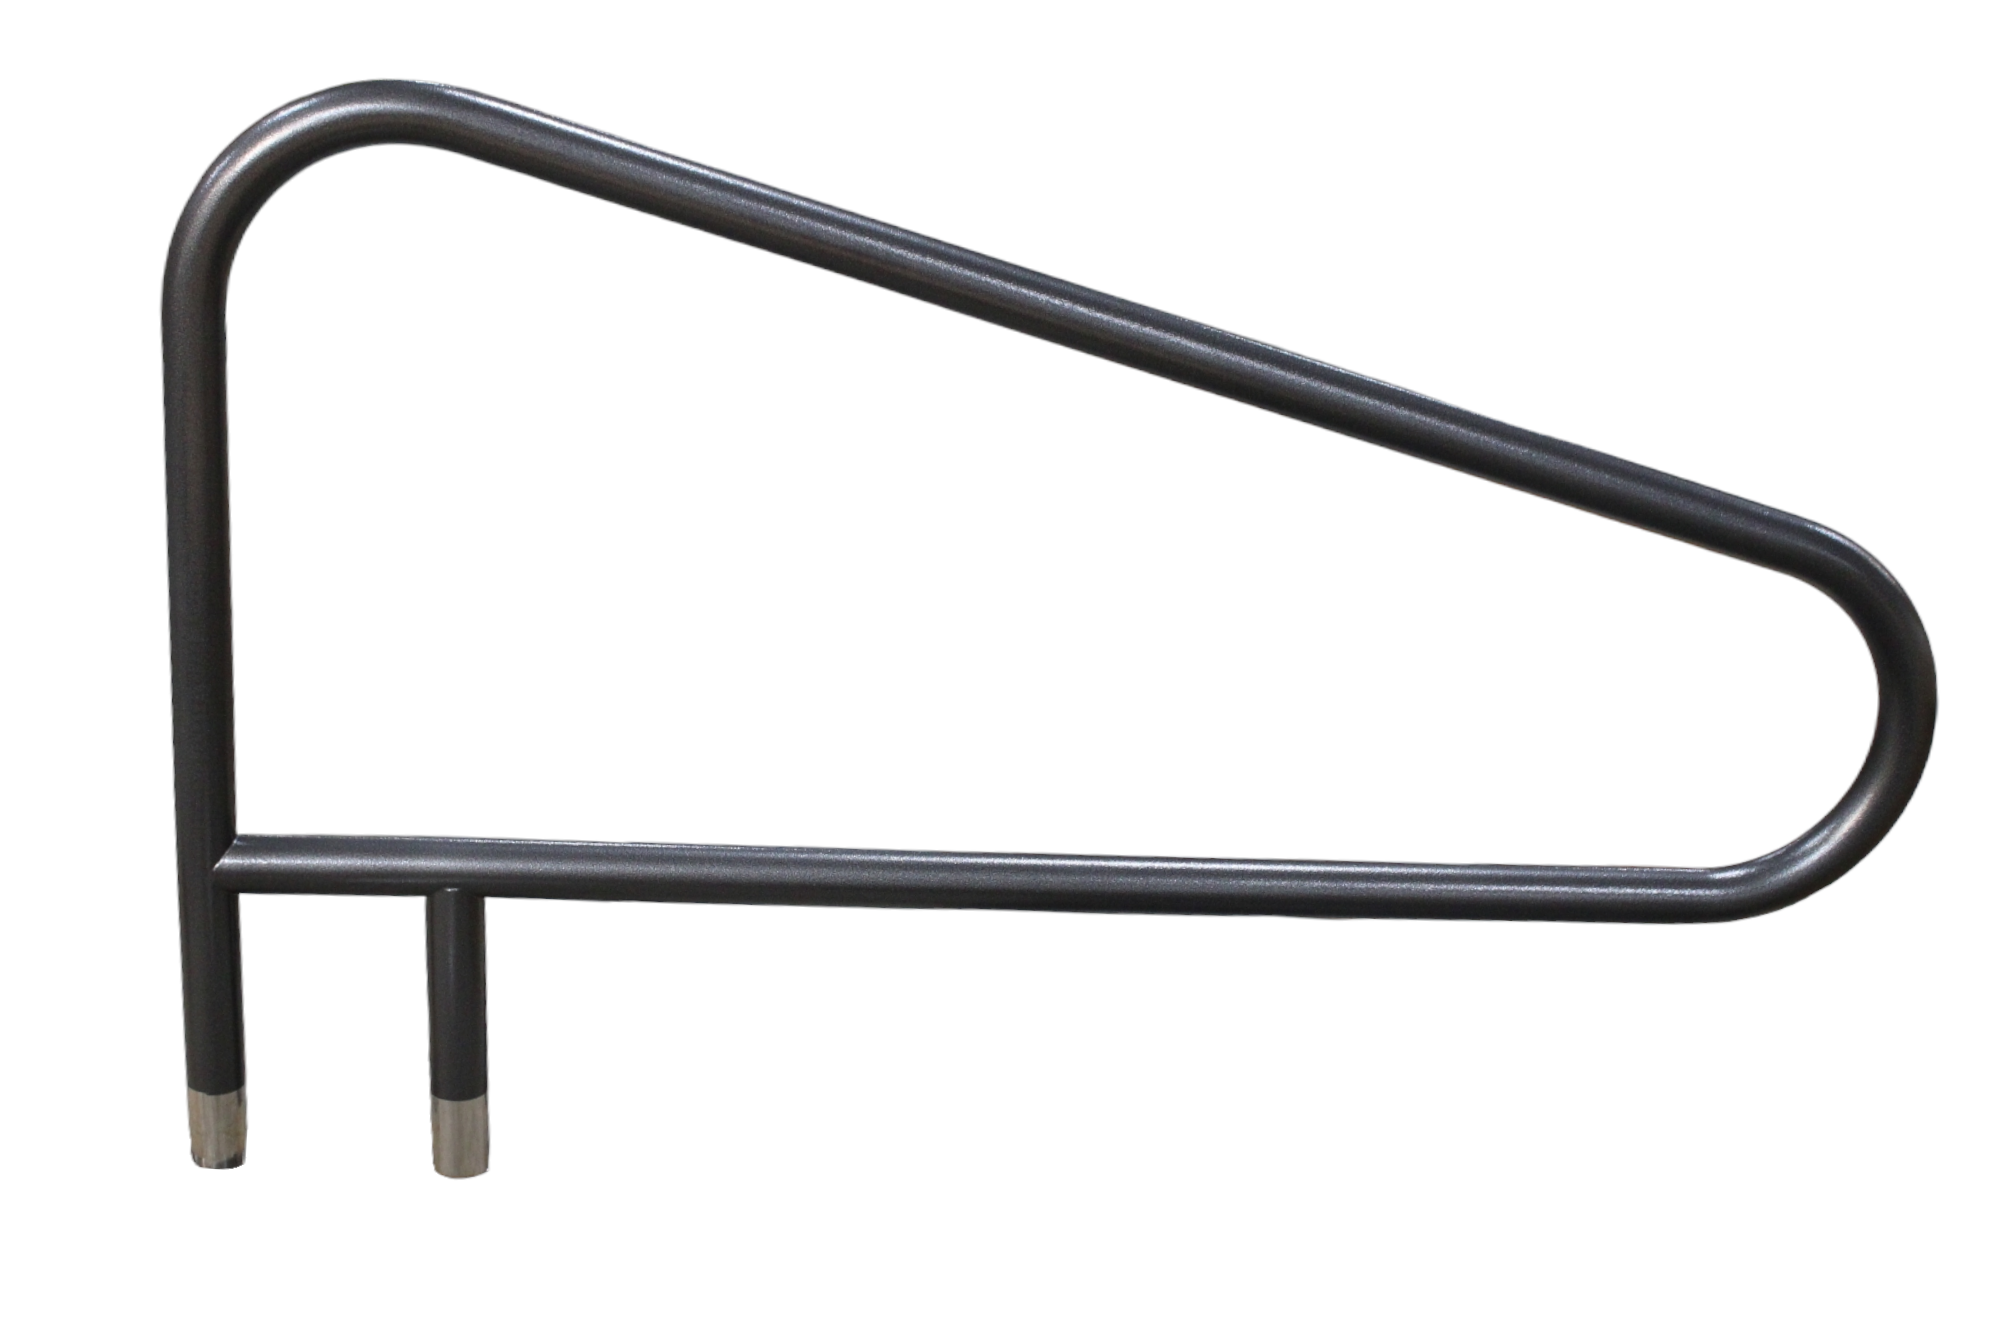 Global 3 Bend Gray Granite Handrail - CLEARANCE SAFETY COVERS